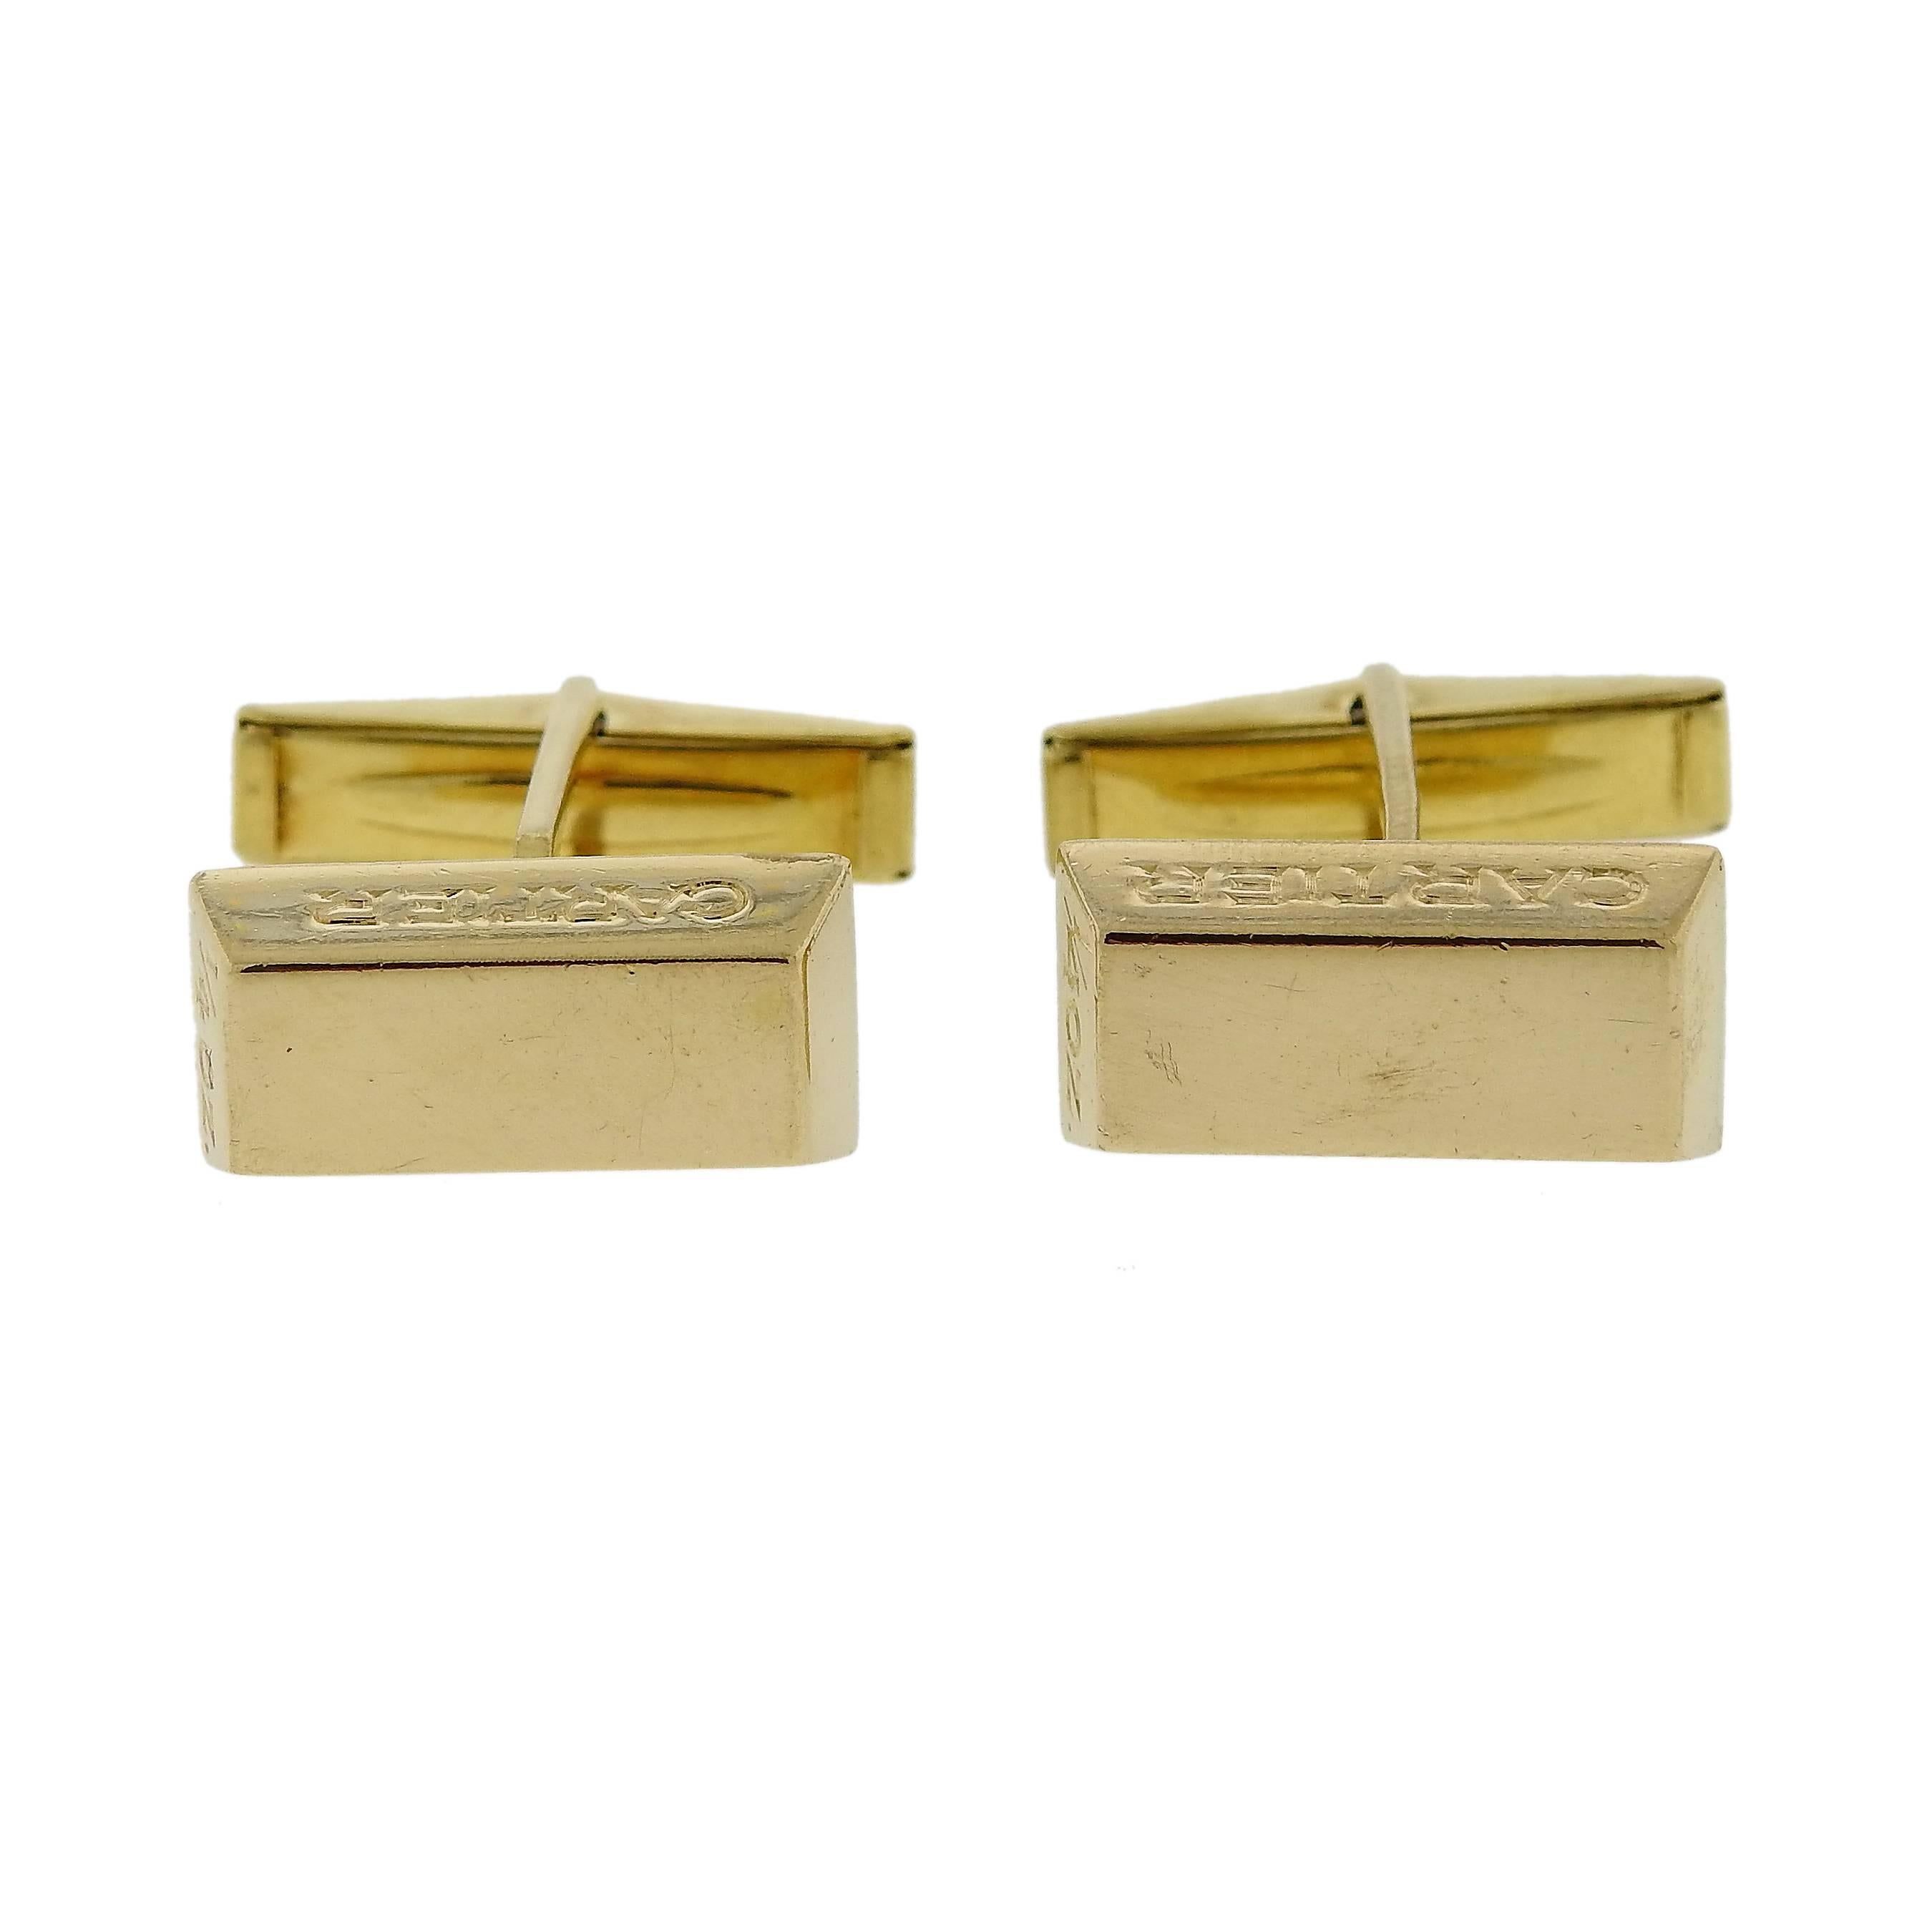 Pair of 18k yellow gold bar cufflinks, crafted by Cartier, containing 1/4oz each.  Each cufflink top is 17mm x 8.7mm and weigh 20.7 grams. Marked: Cartier, 1/4oz, 18k